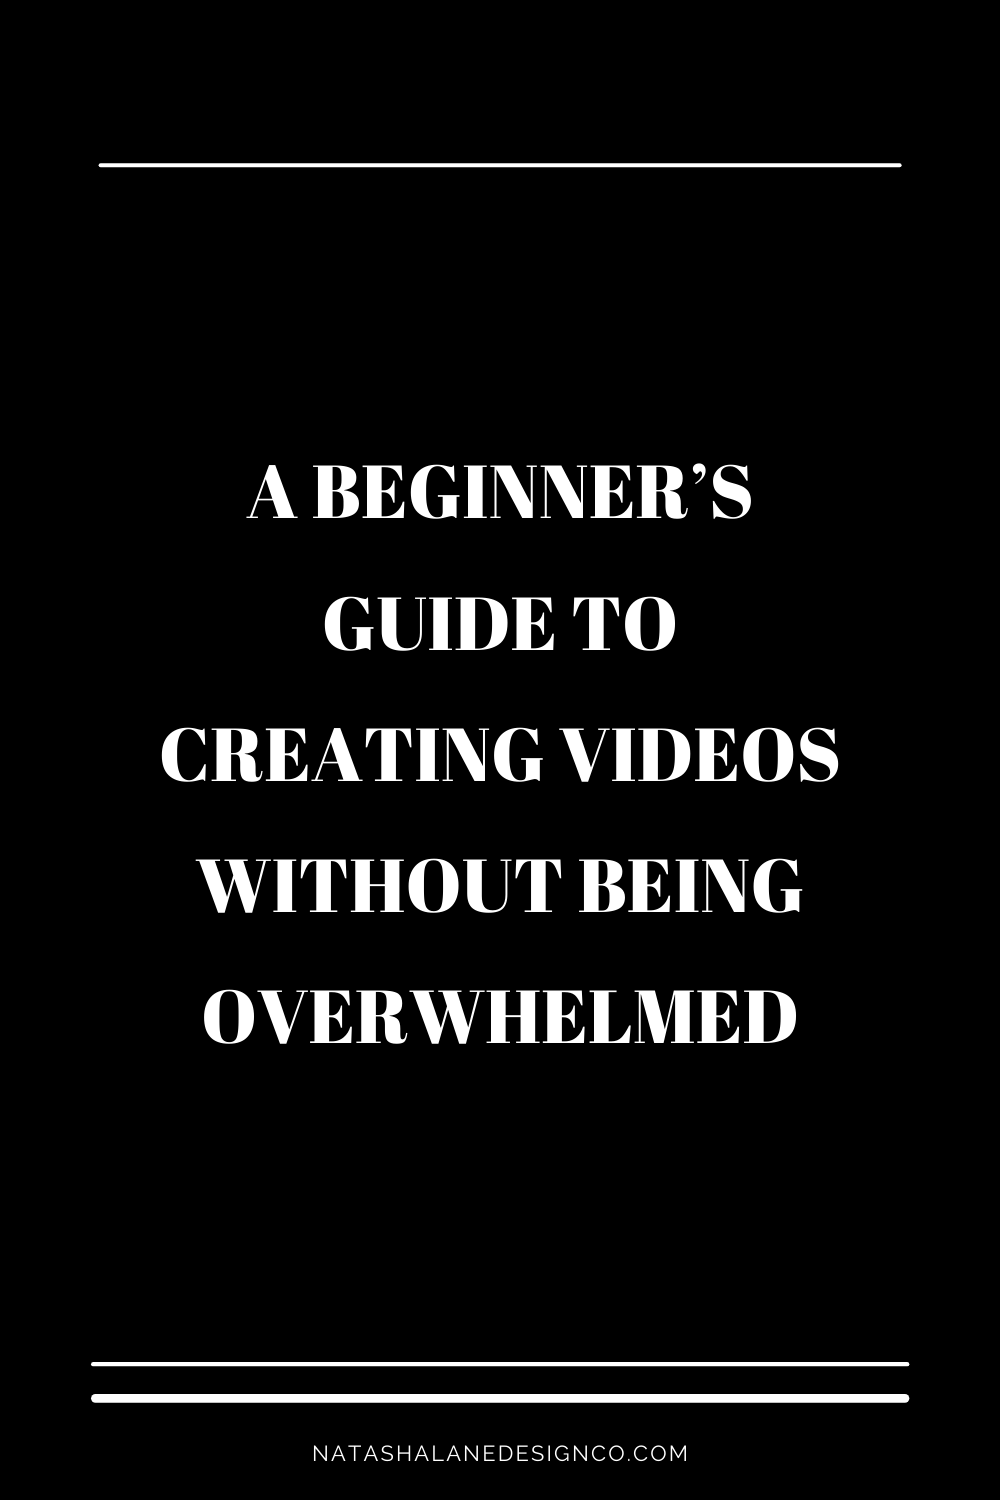 create videos without being overwhelmed (4)